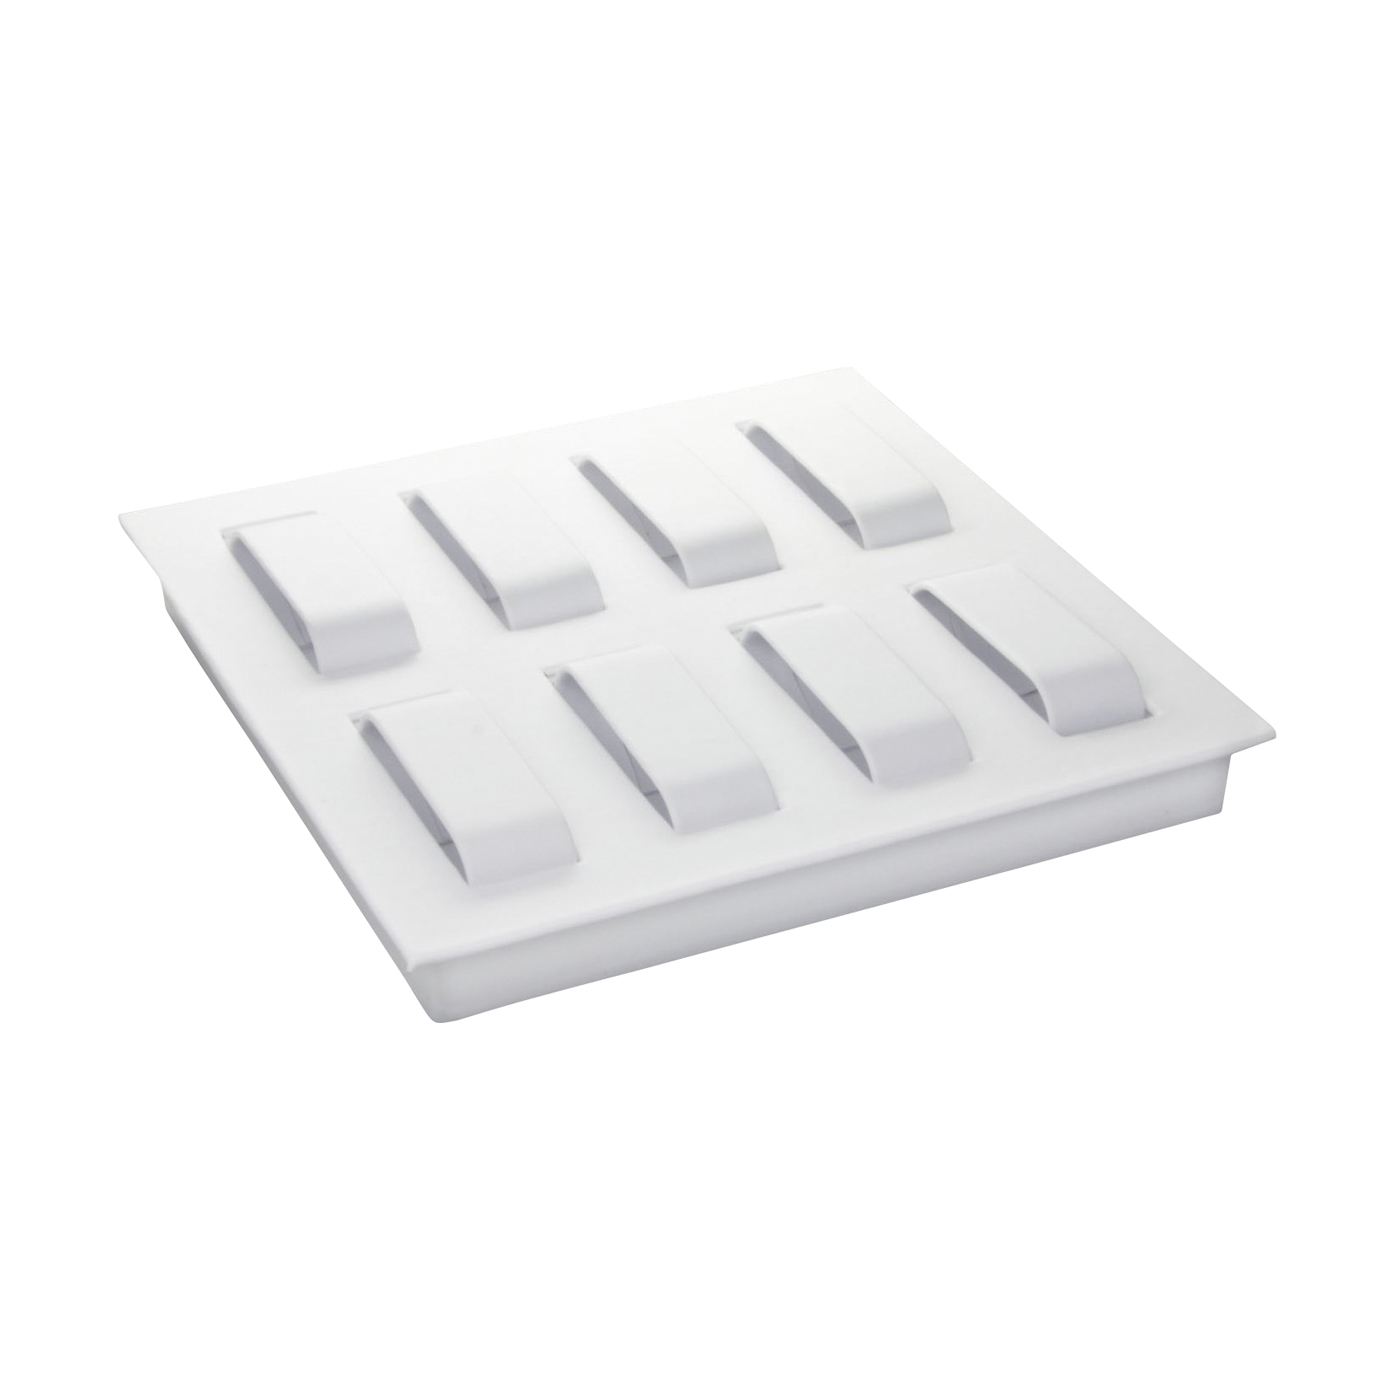 Tray System Inlay, White, for 8 Watches, 224 x 224 mm - 1 piece